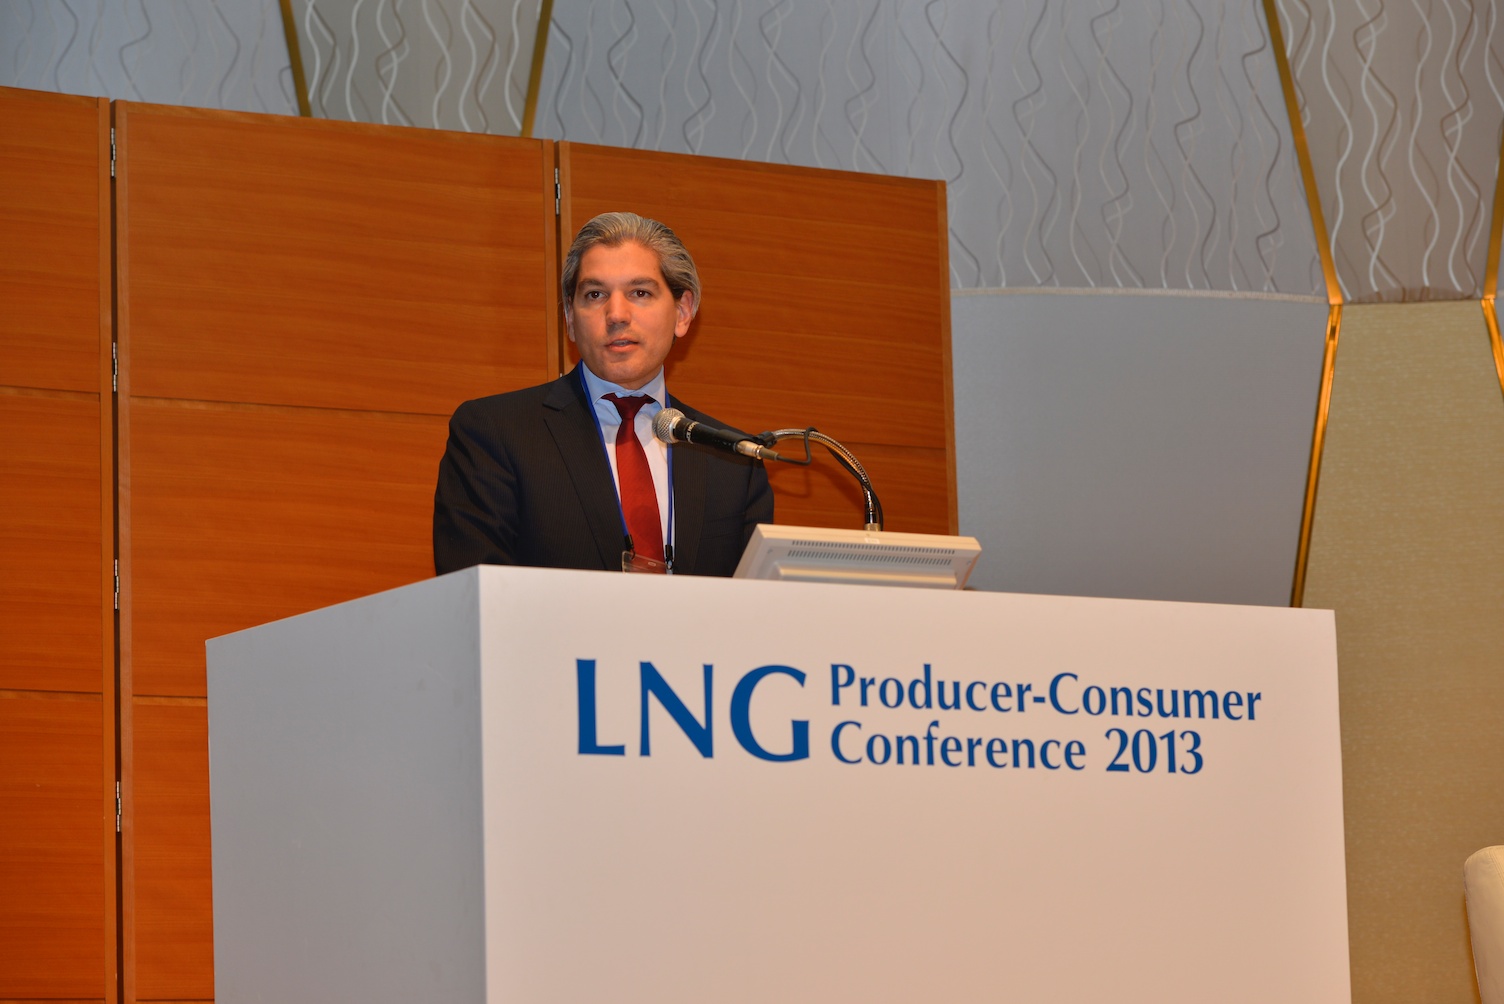 LNG Producer Consumer Conference 2013  (8)  09 10 2013